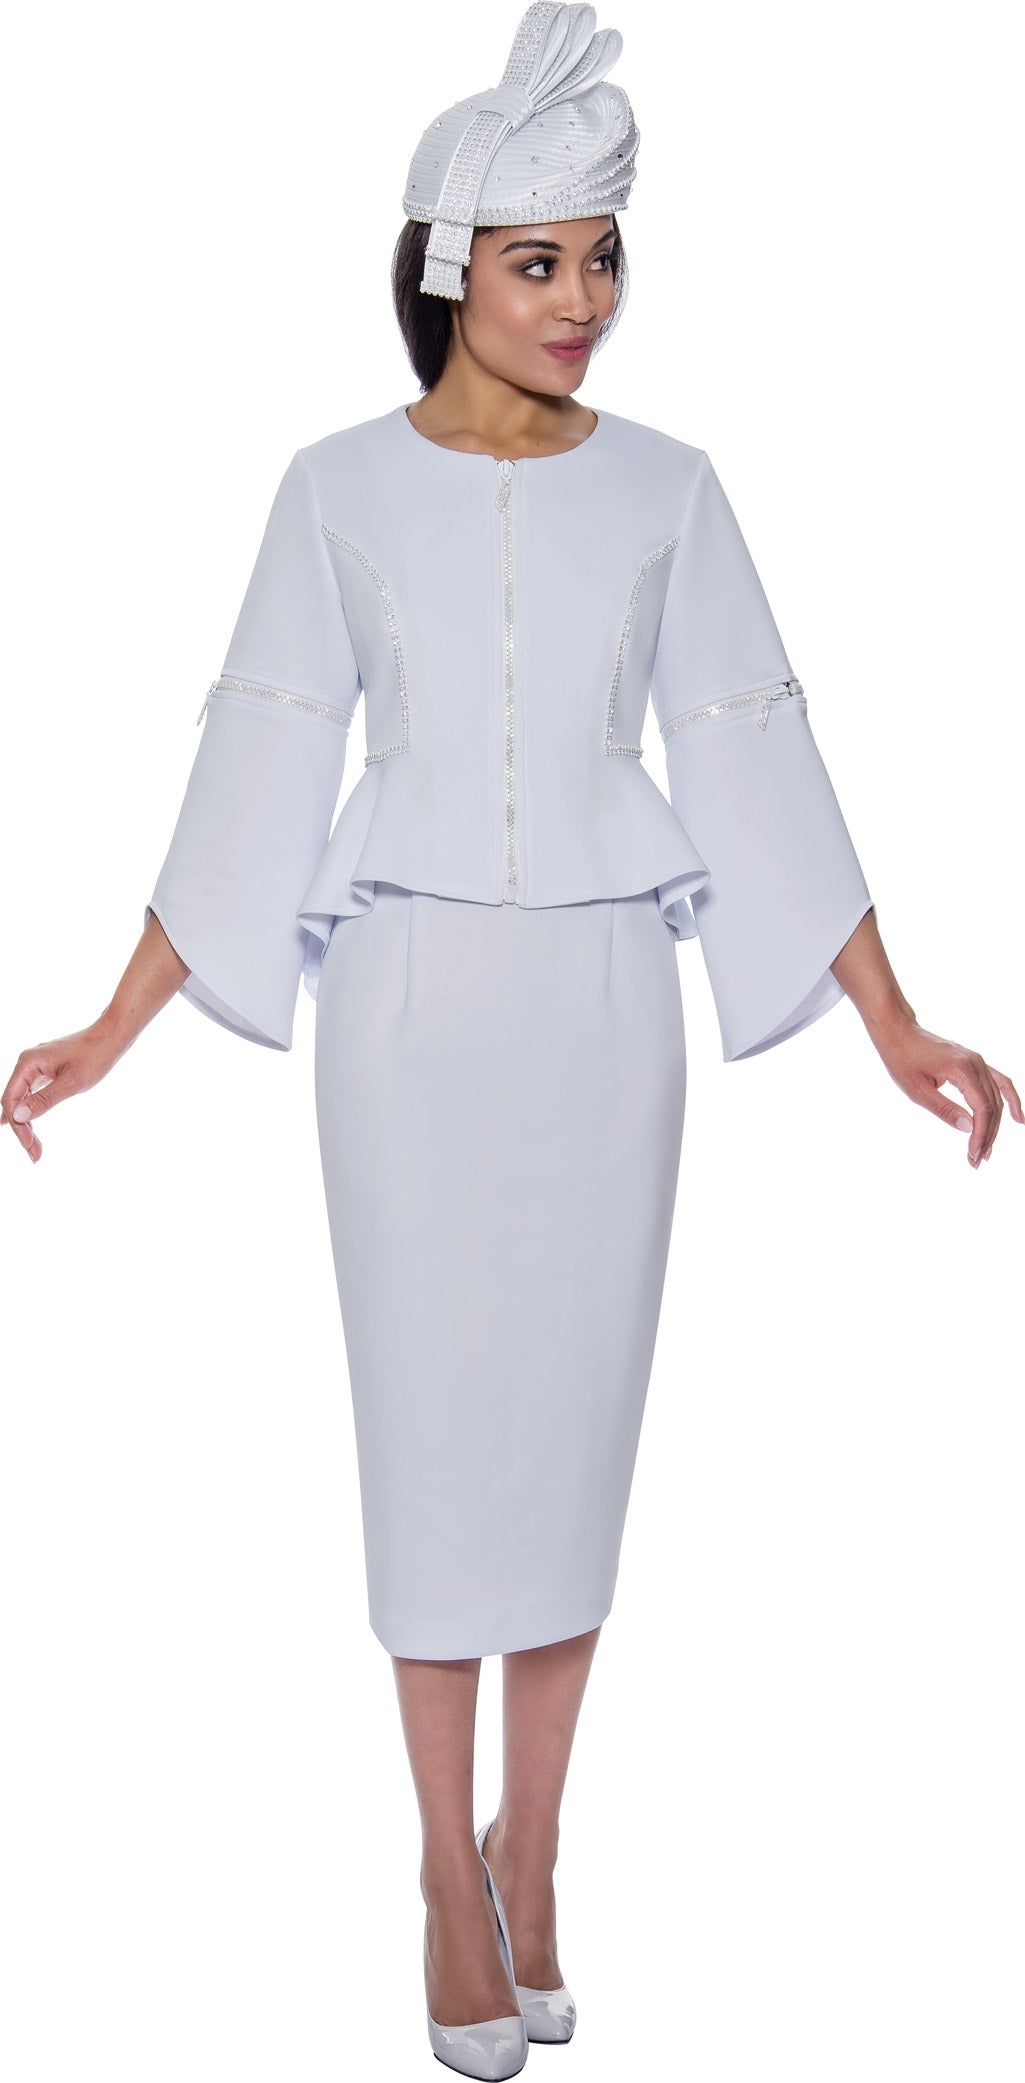 This is a beautiful High-low style 2pc Skirt Suit. The peplum jacket is detailed with rhinestone trim and a Zipper Trim down the front and mid-level the detachable bell sleeves. The skirt The relax fit skirt has a waistband and zipper. Fabric: Peachskin